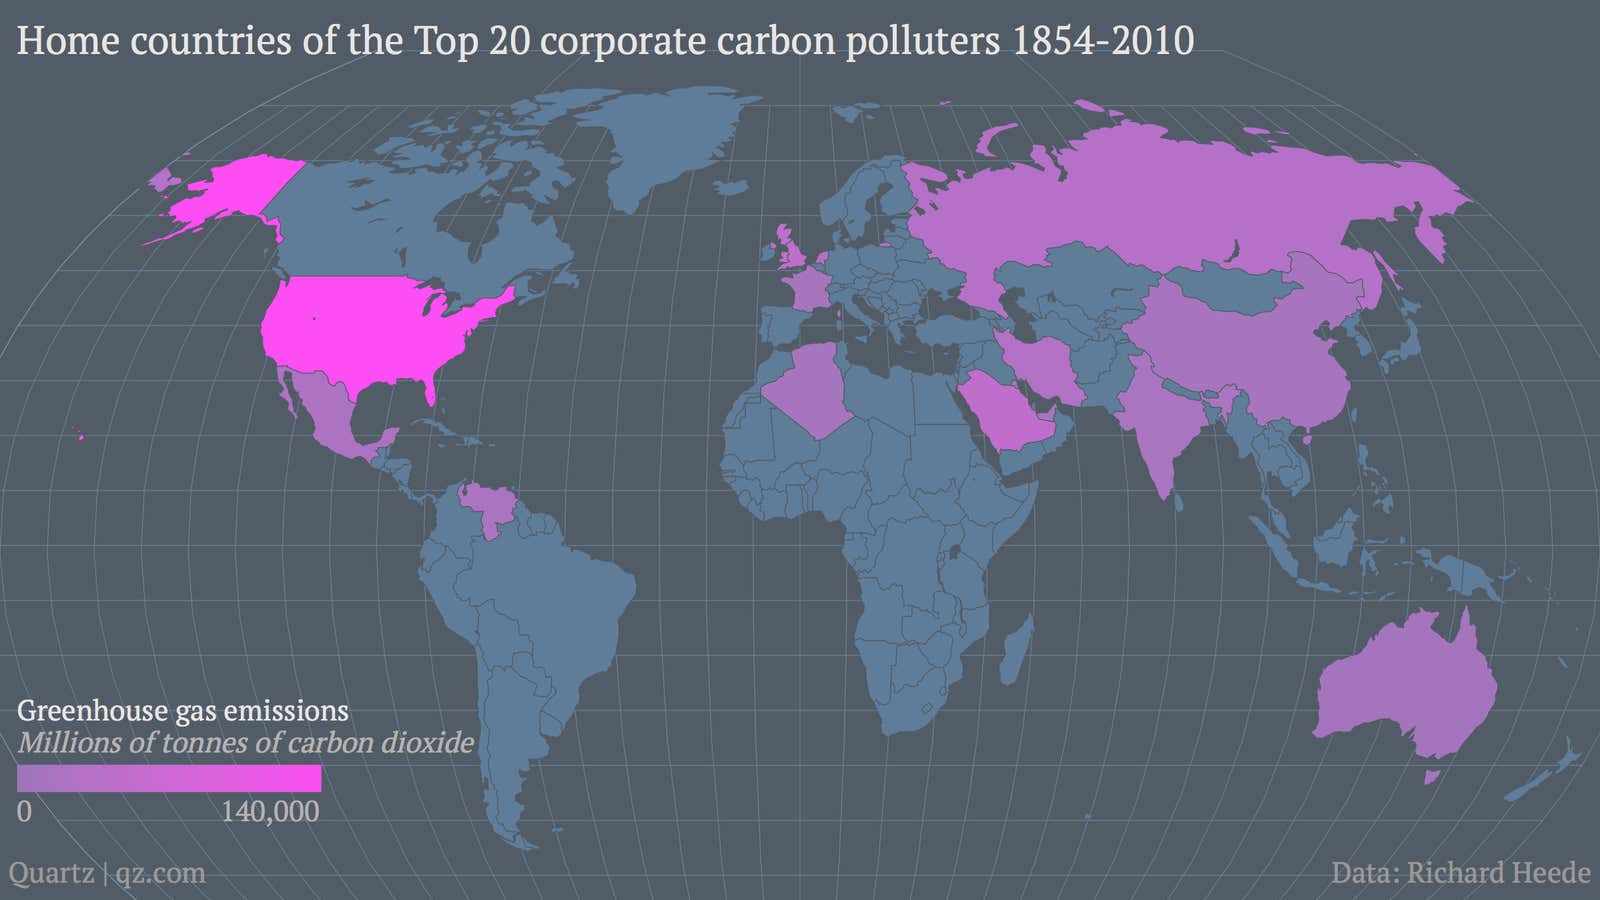 A map of the 90 corporations responsible for 63% of global carbon emissions since 1854